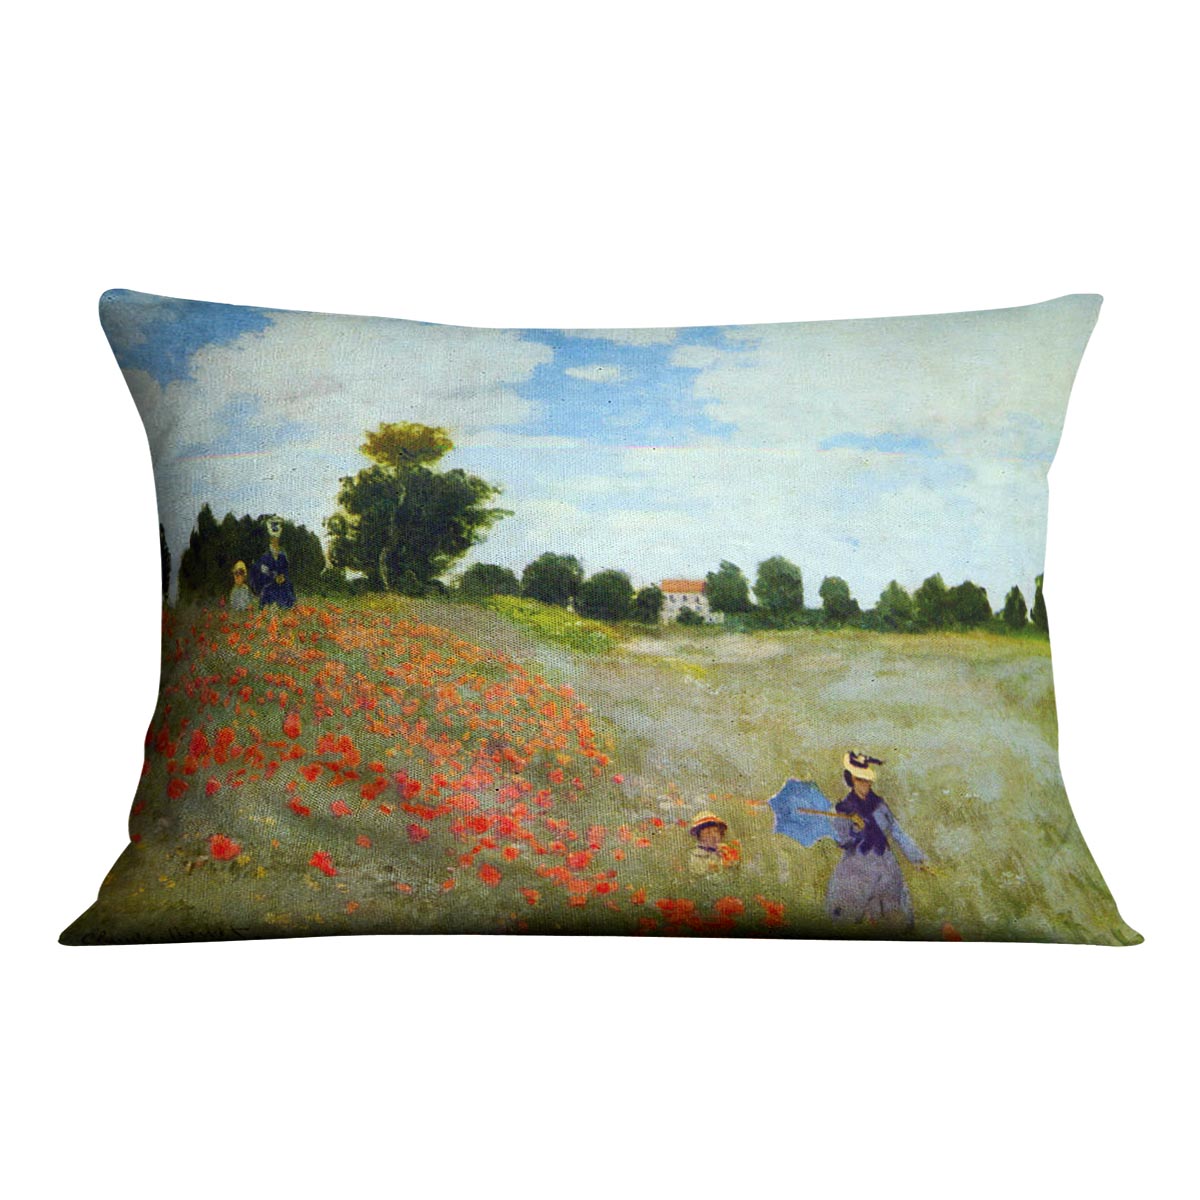 Poppies by Monet Cushion